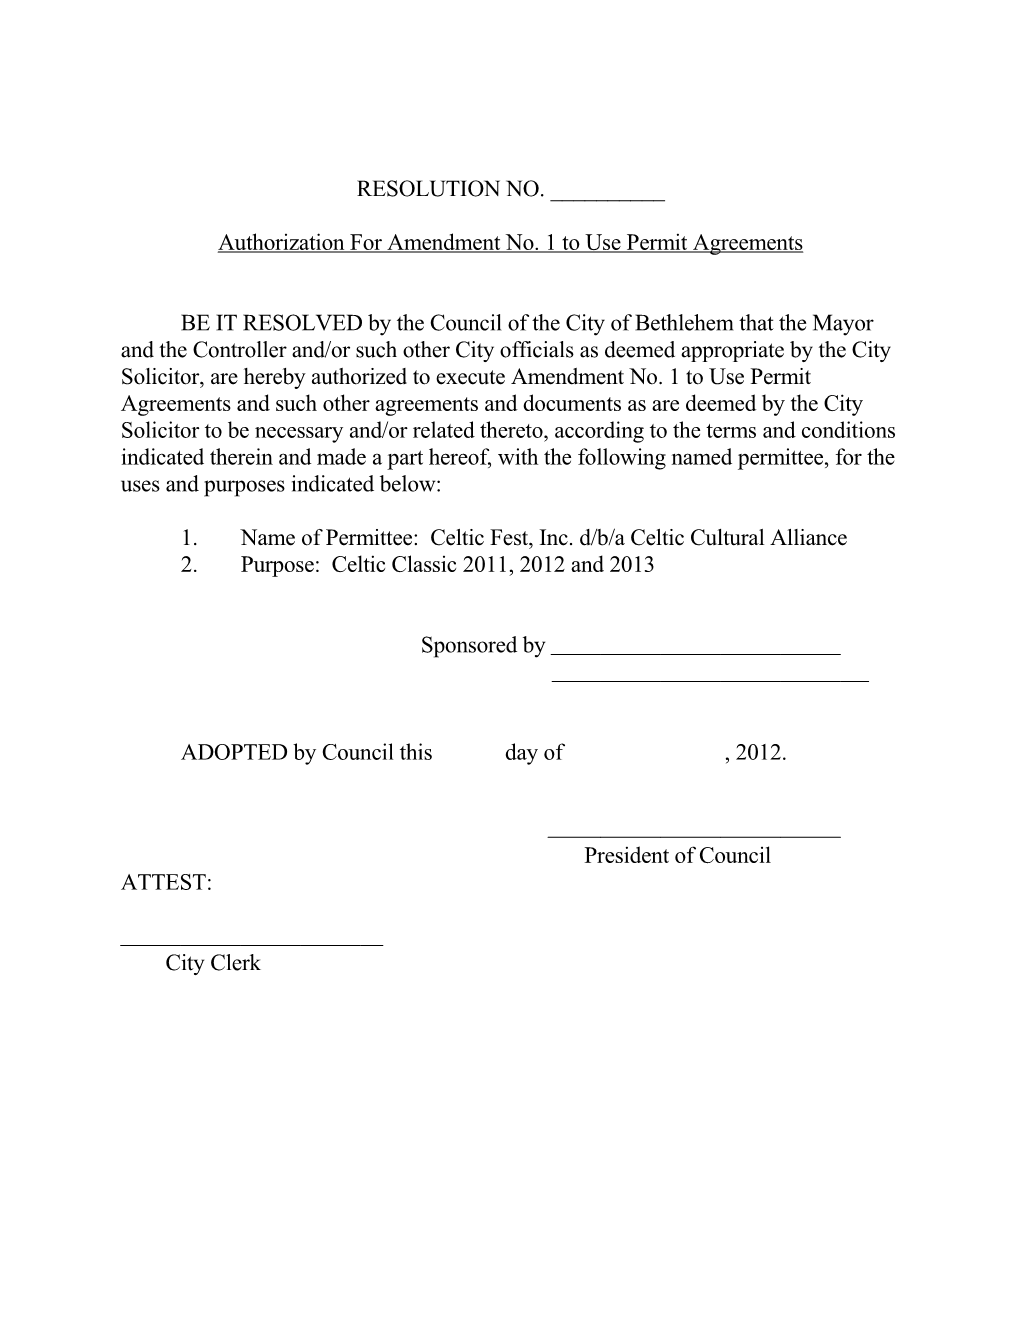 Authorization for Amendment No. 1 to Use Permit Agreements